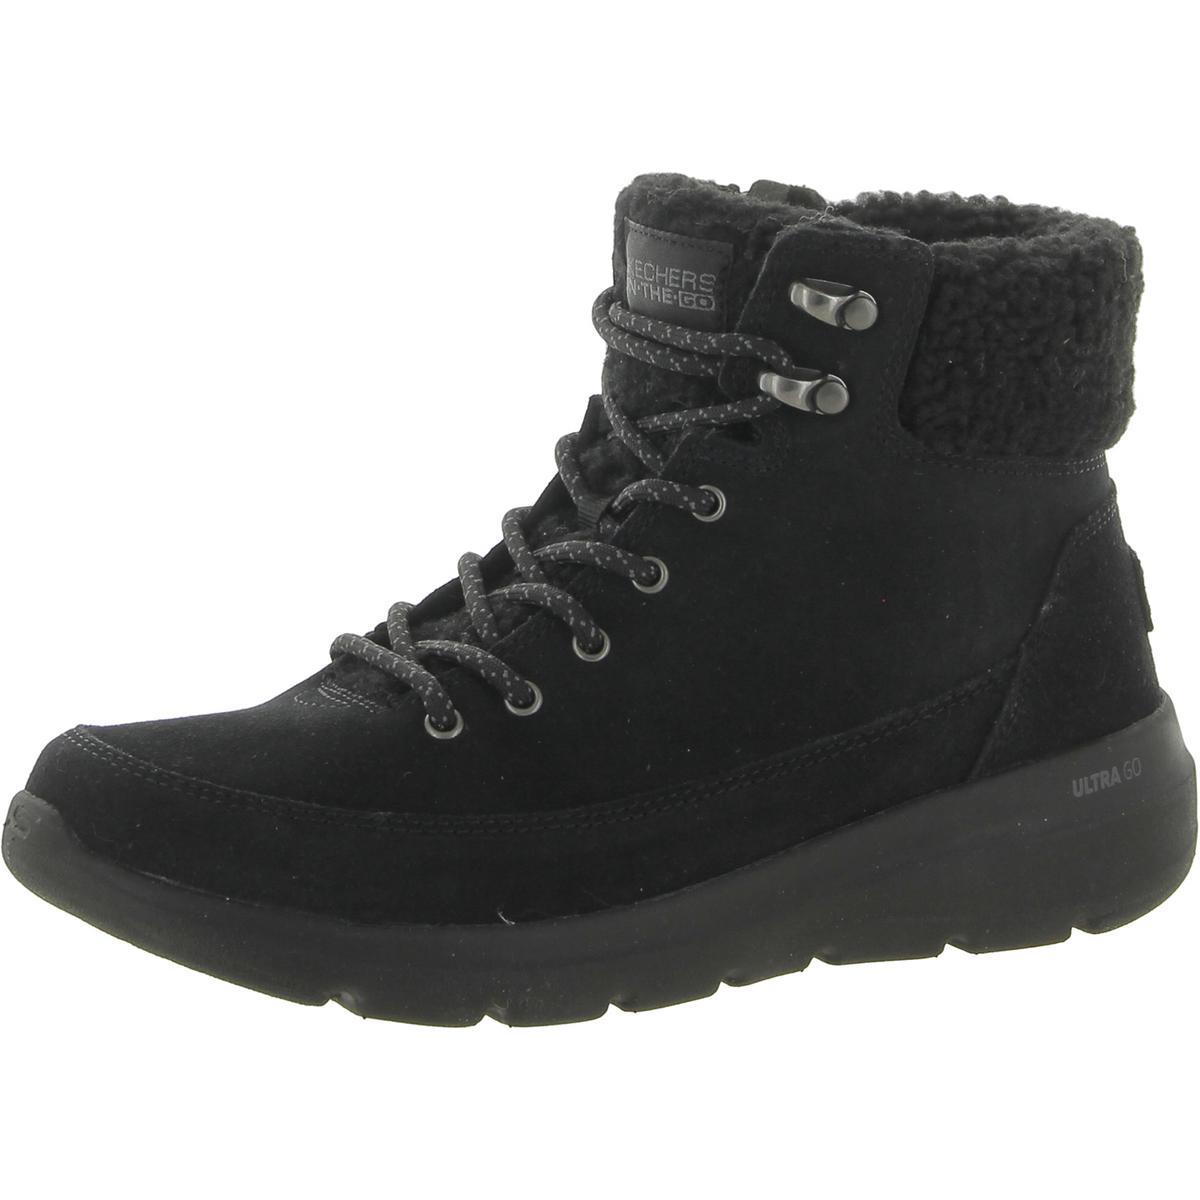 Skechers Womens Glacial Ultra - Wood Suede Winter Snow Boots Shoes Bhfo 0123 Black/Black